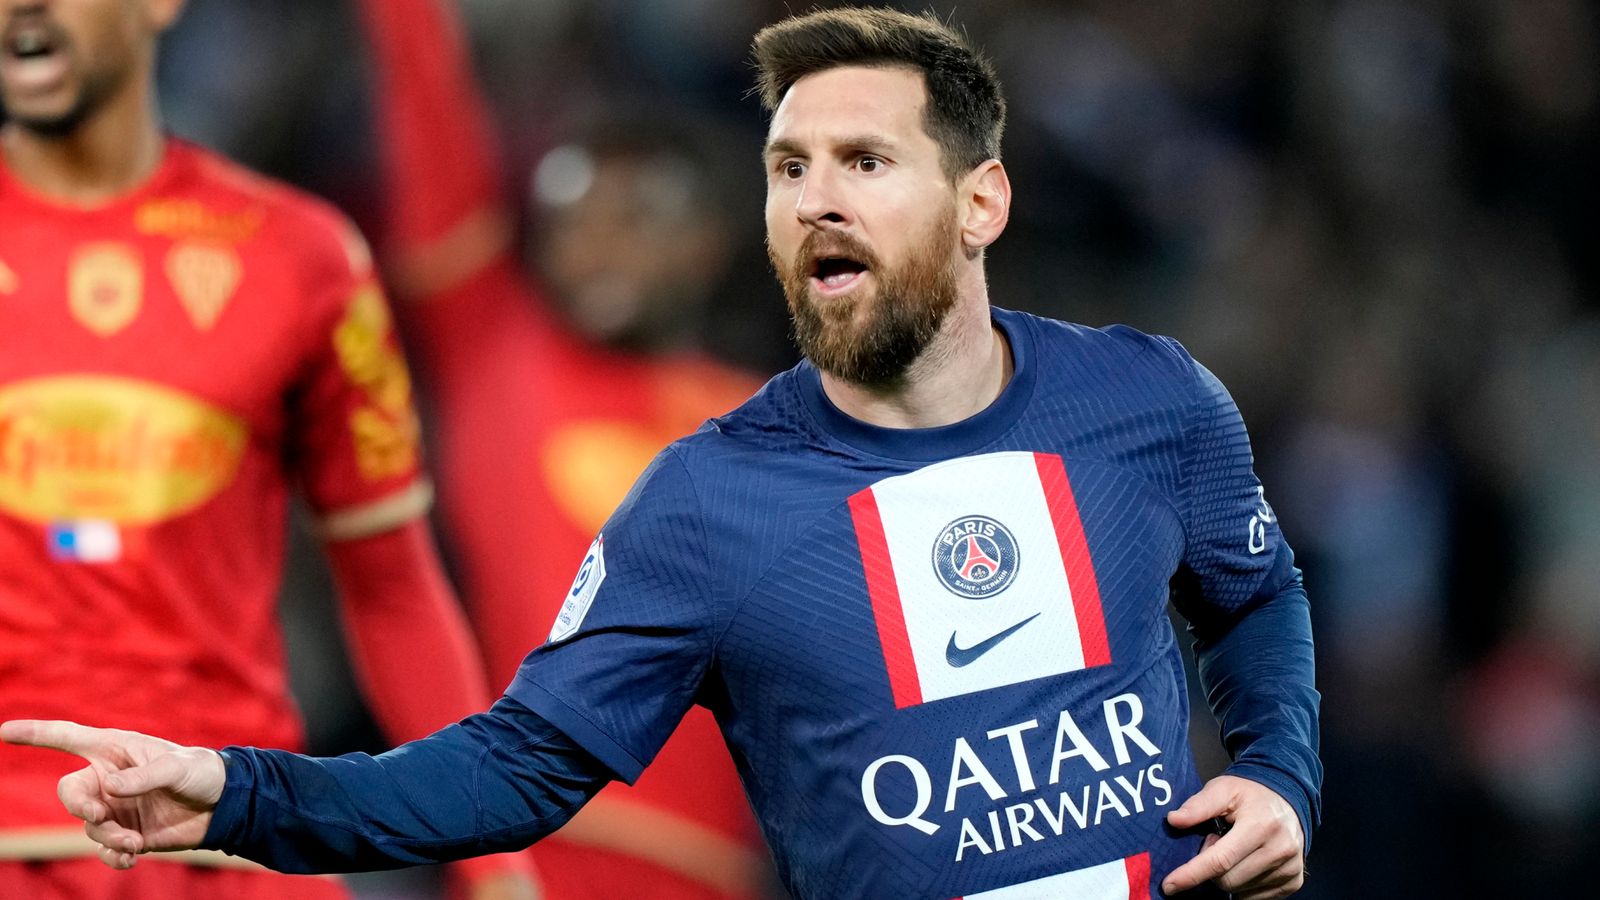 Messi apologizes for unauthorized Saudi trip, resulting in suspension